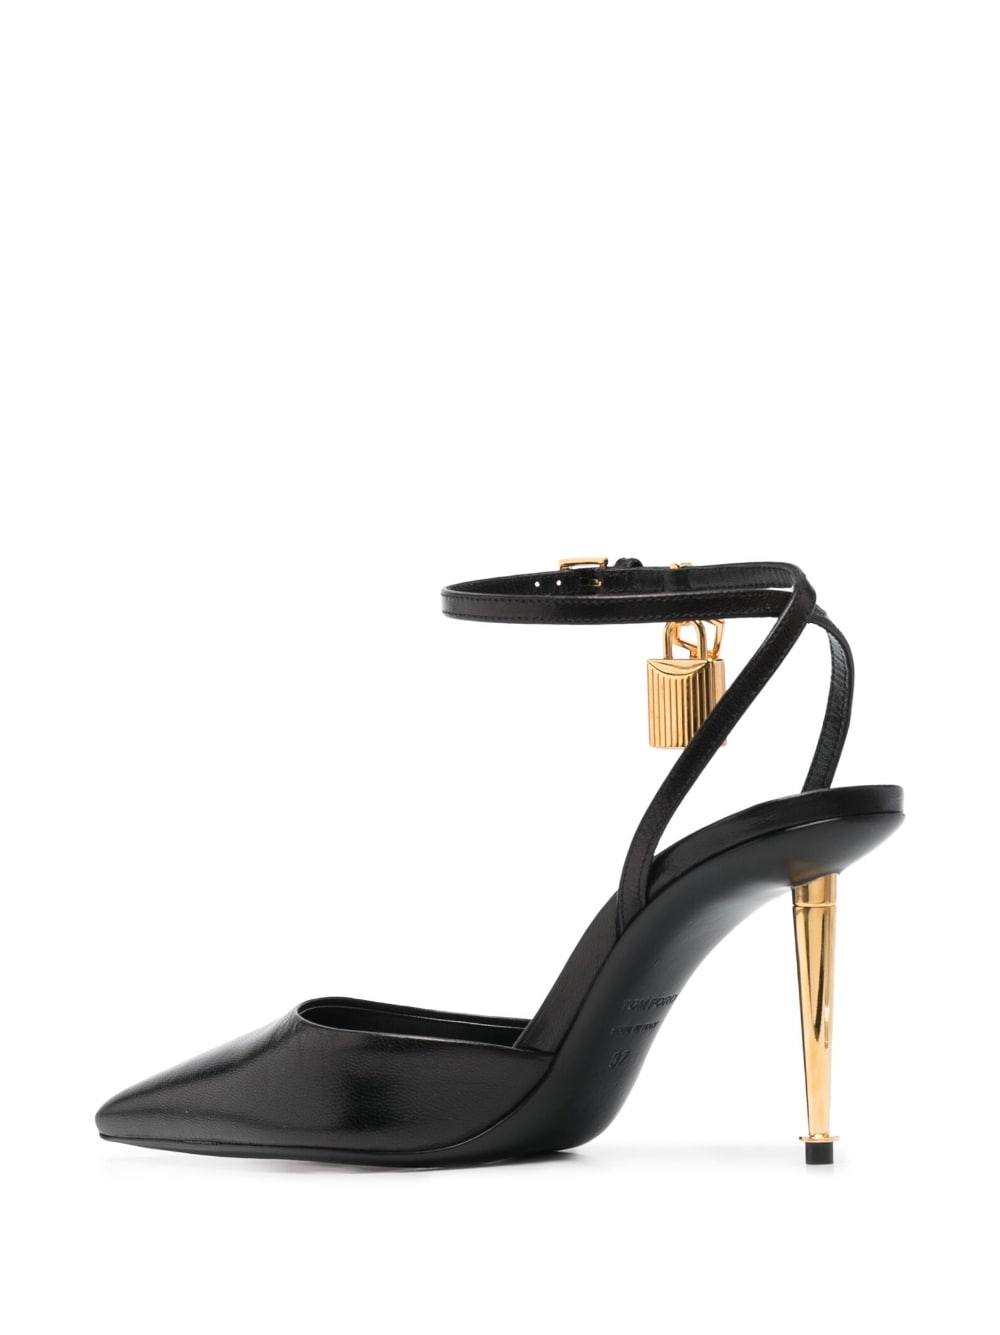 TOM FORD Luxurious Black Leather 90mm Pumps with Gold-Tone Hardware and Iconic Padlock Detail